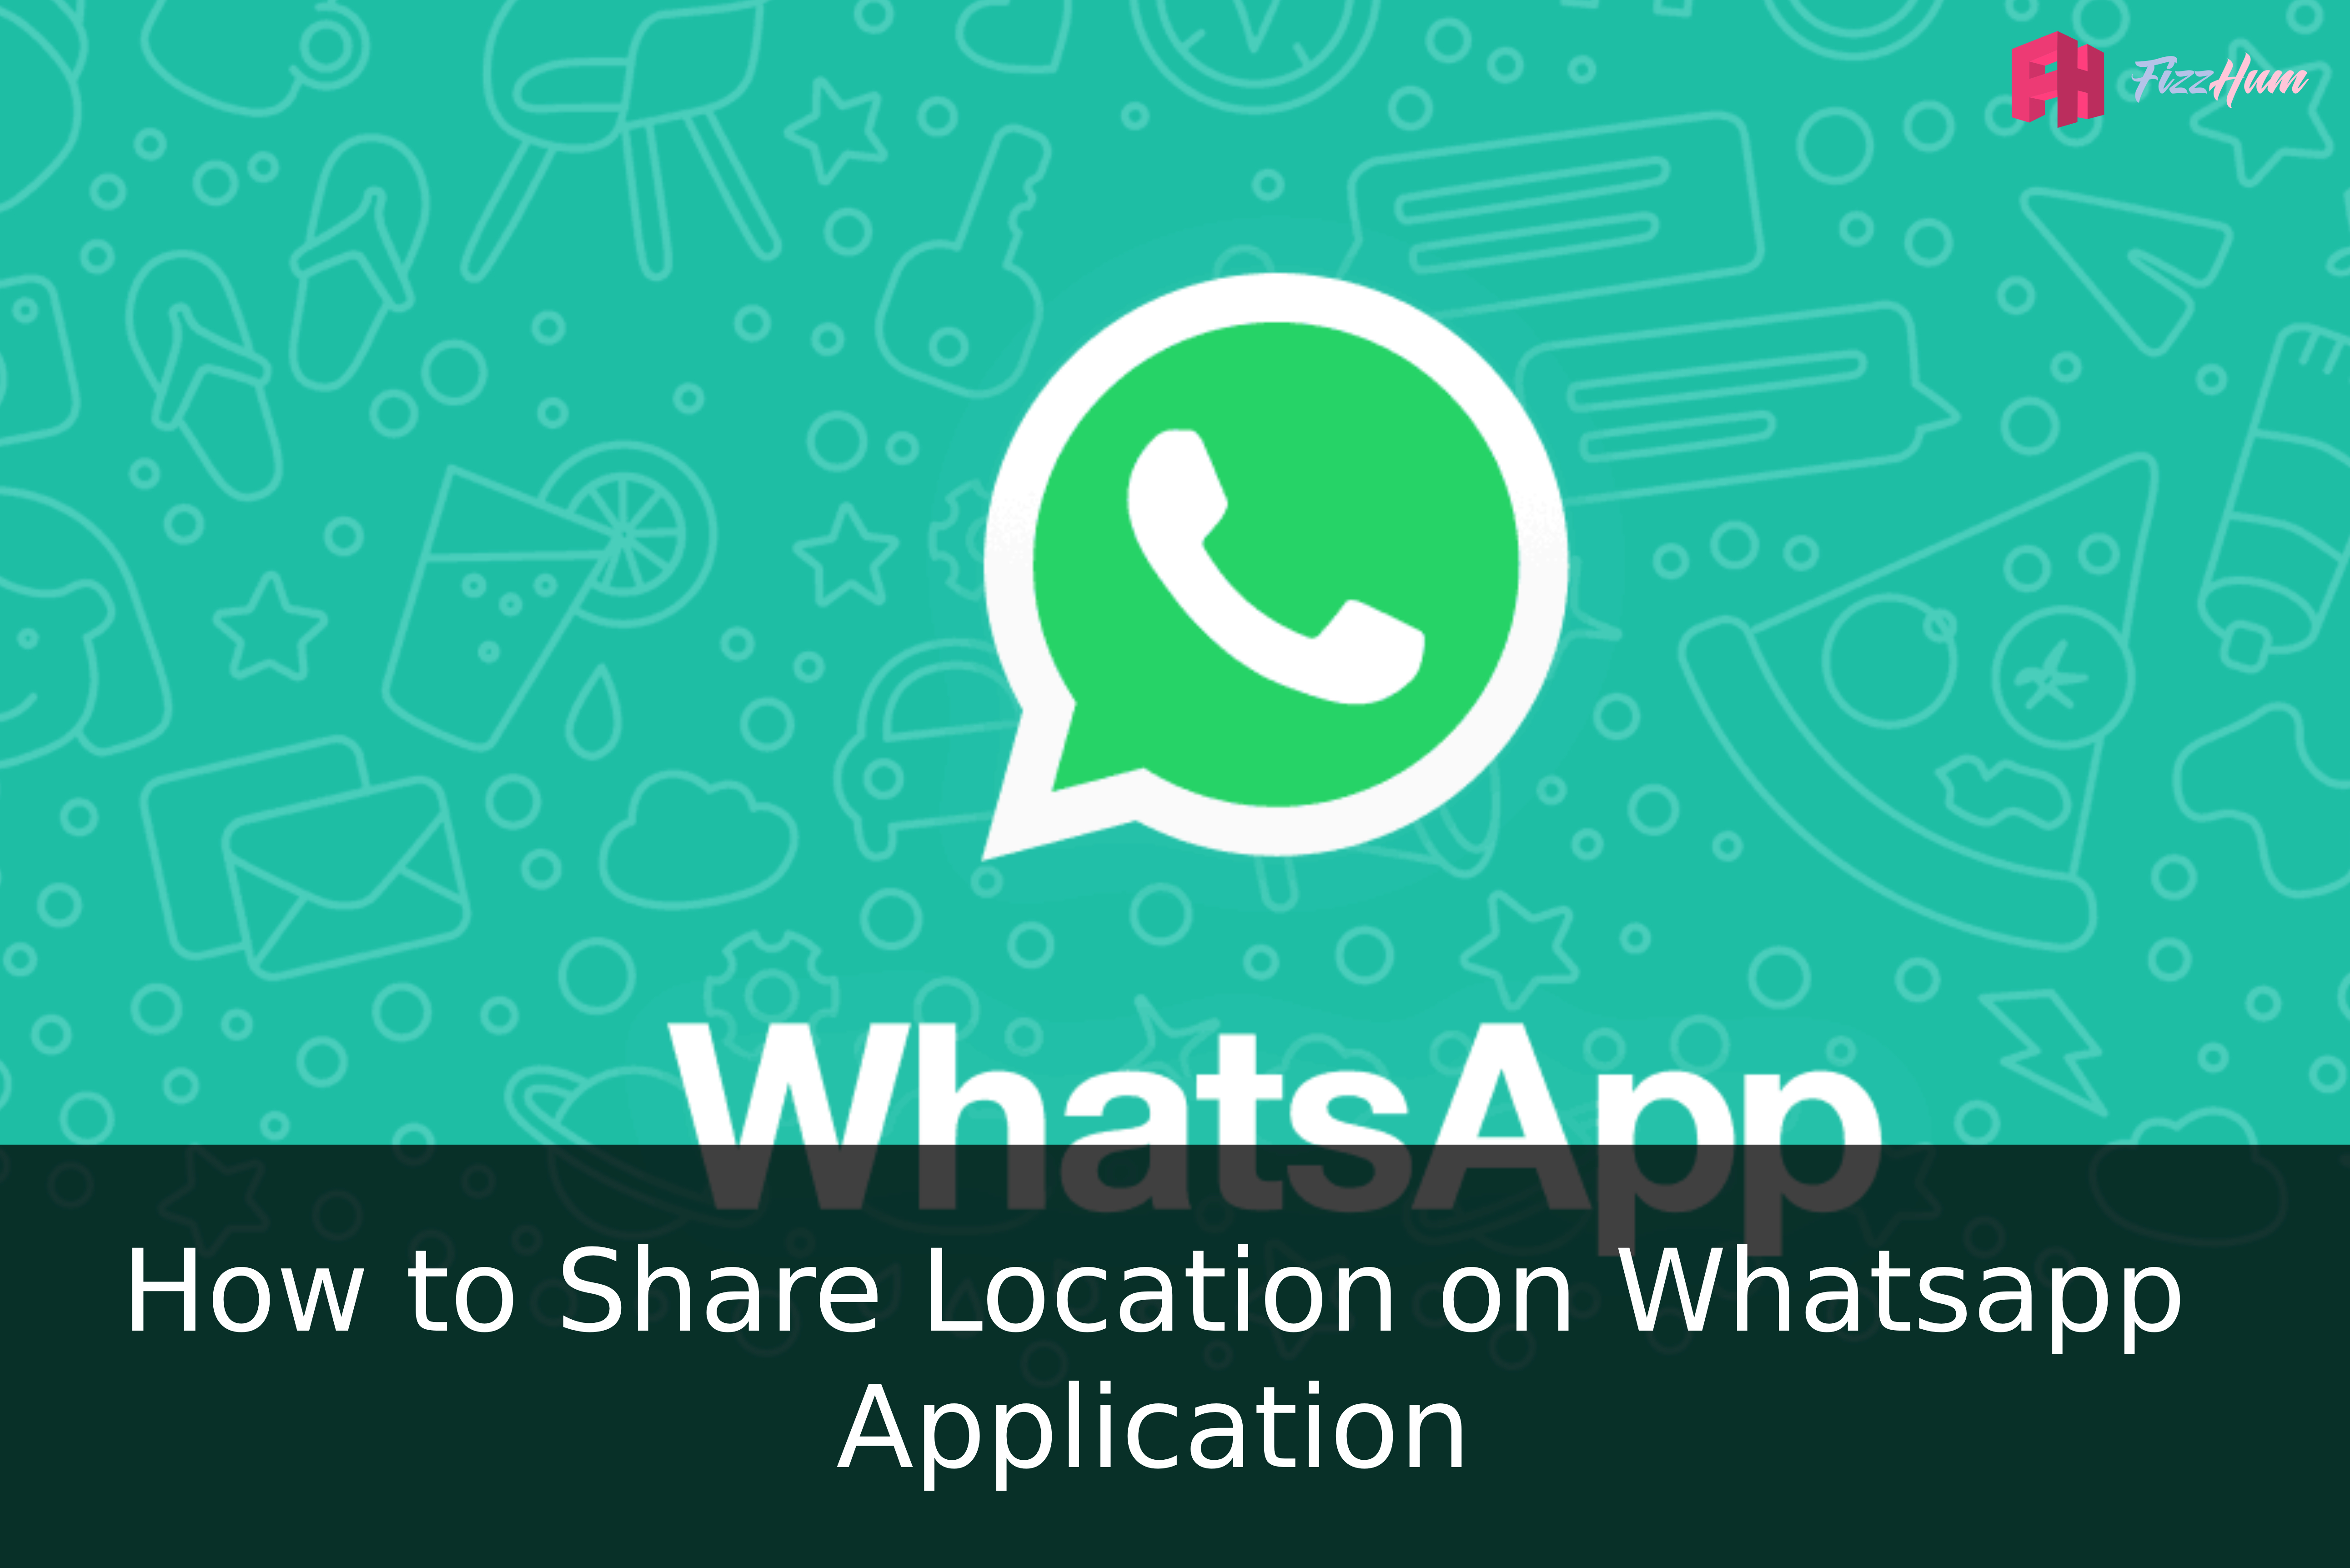 How to share Location on WhatsApp